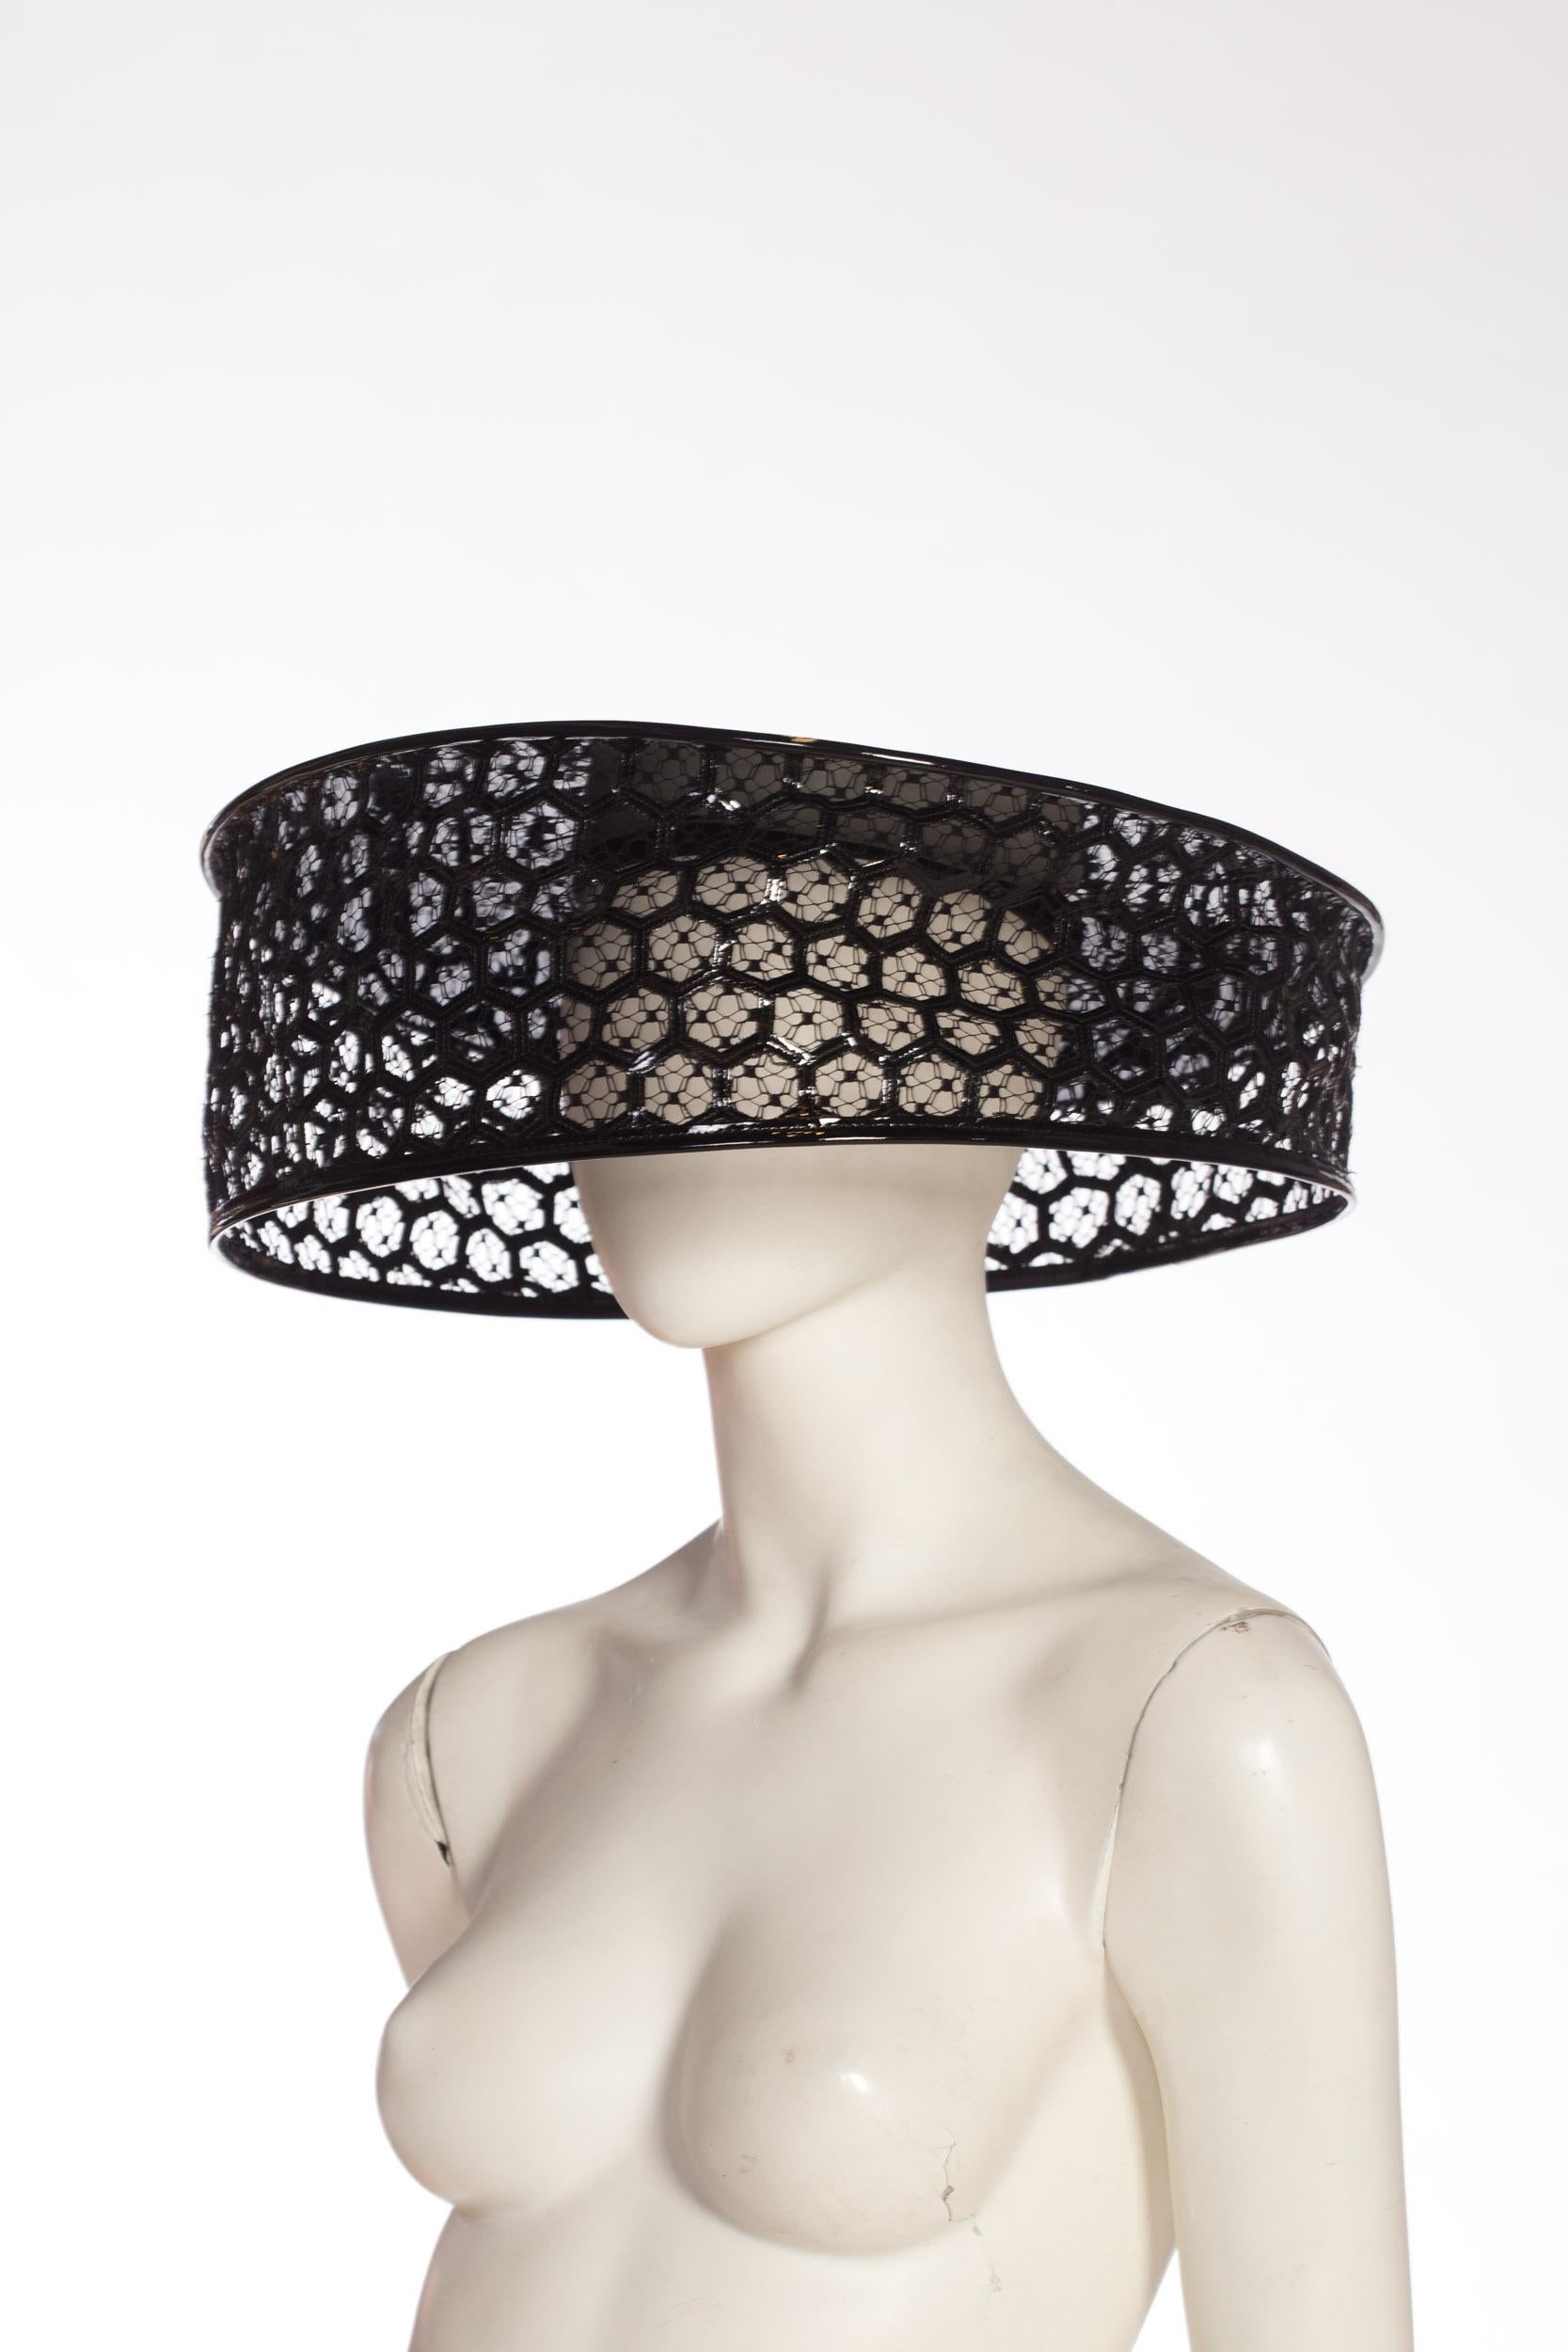 2013 Alexander McQueen Beekeeper Hat Black Patent Leather With 22 Circumference In Excellent Condition In New York, NY